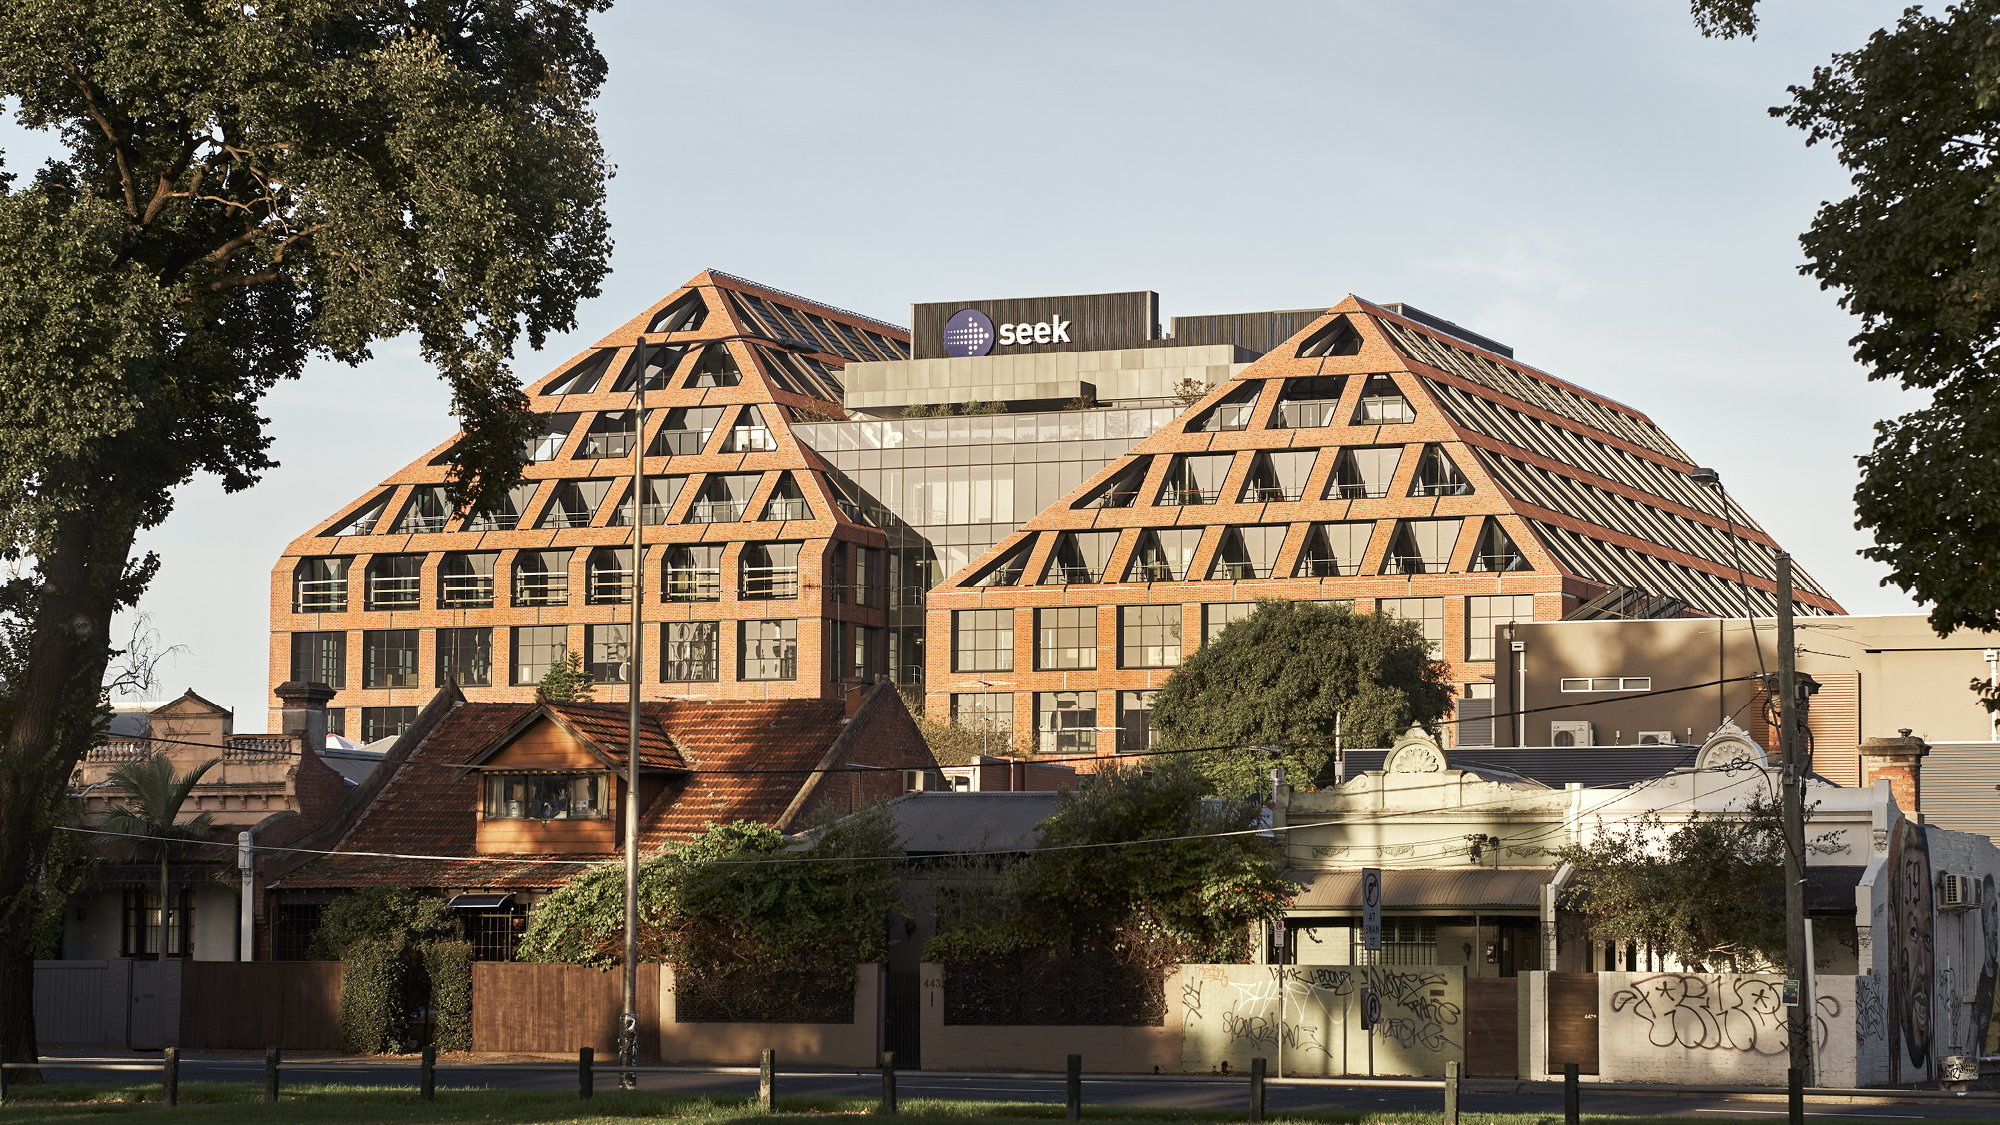 A multi-floor building with triangular shaped facades, timber beams, roof top gardens and brick work